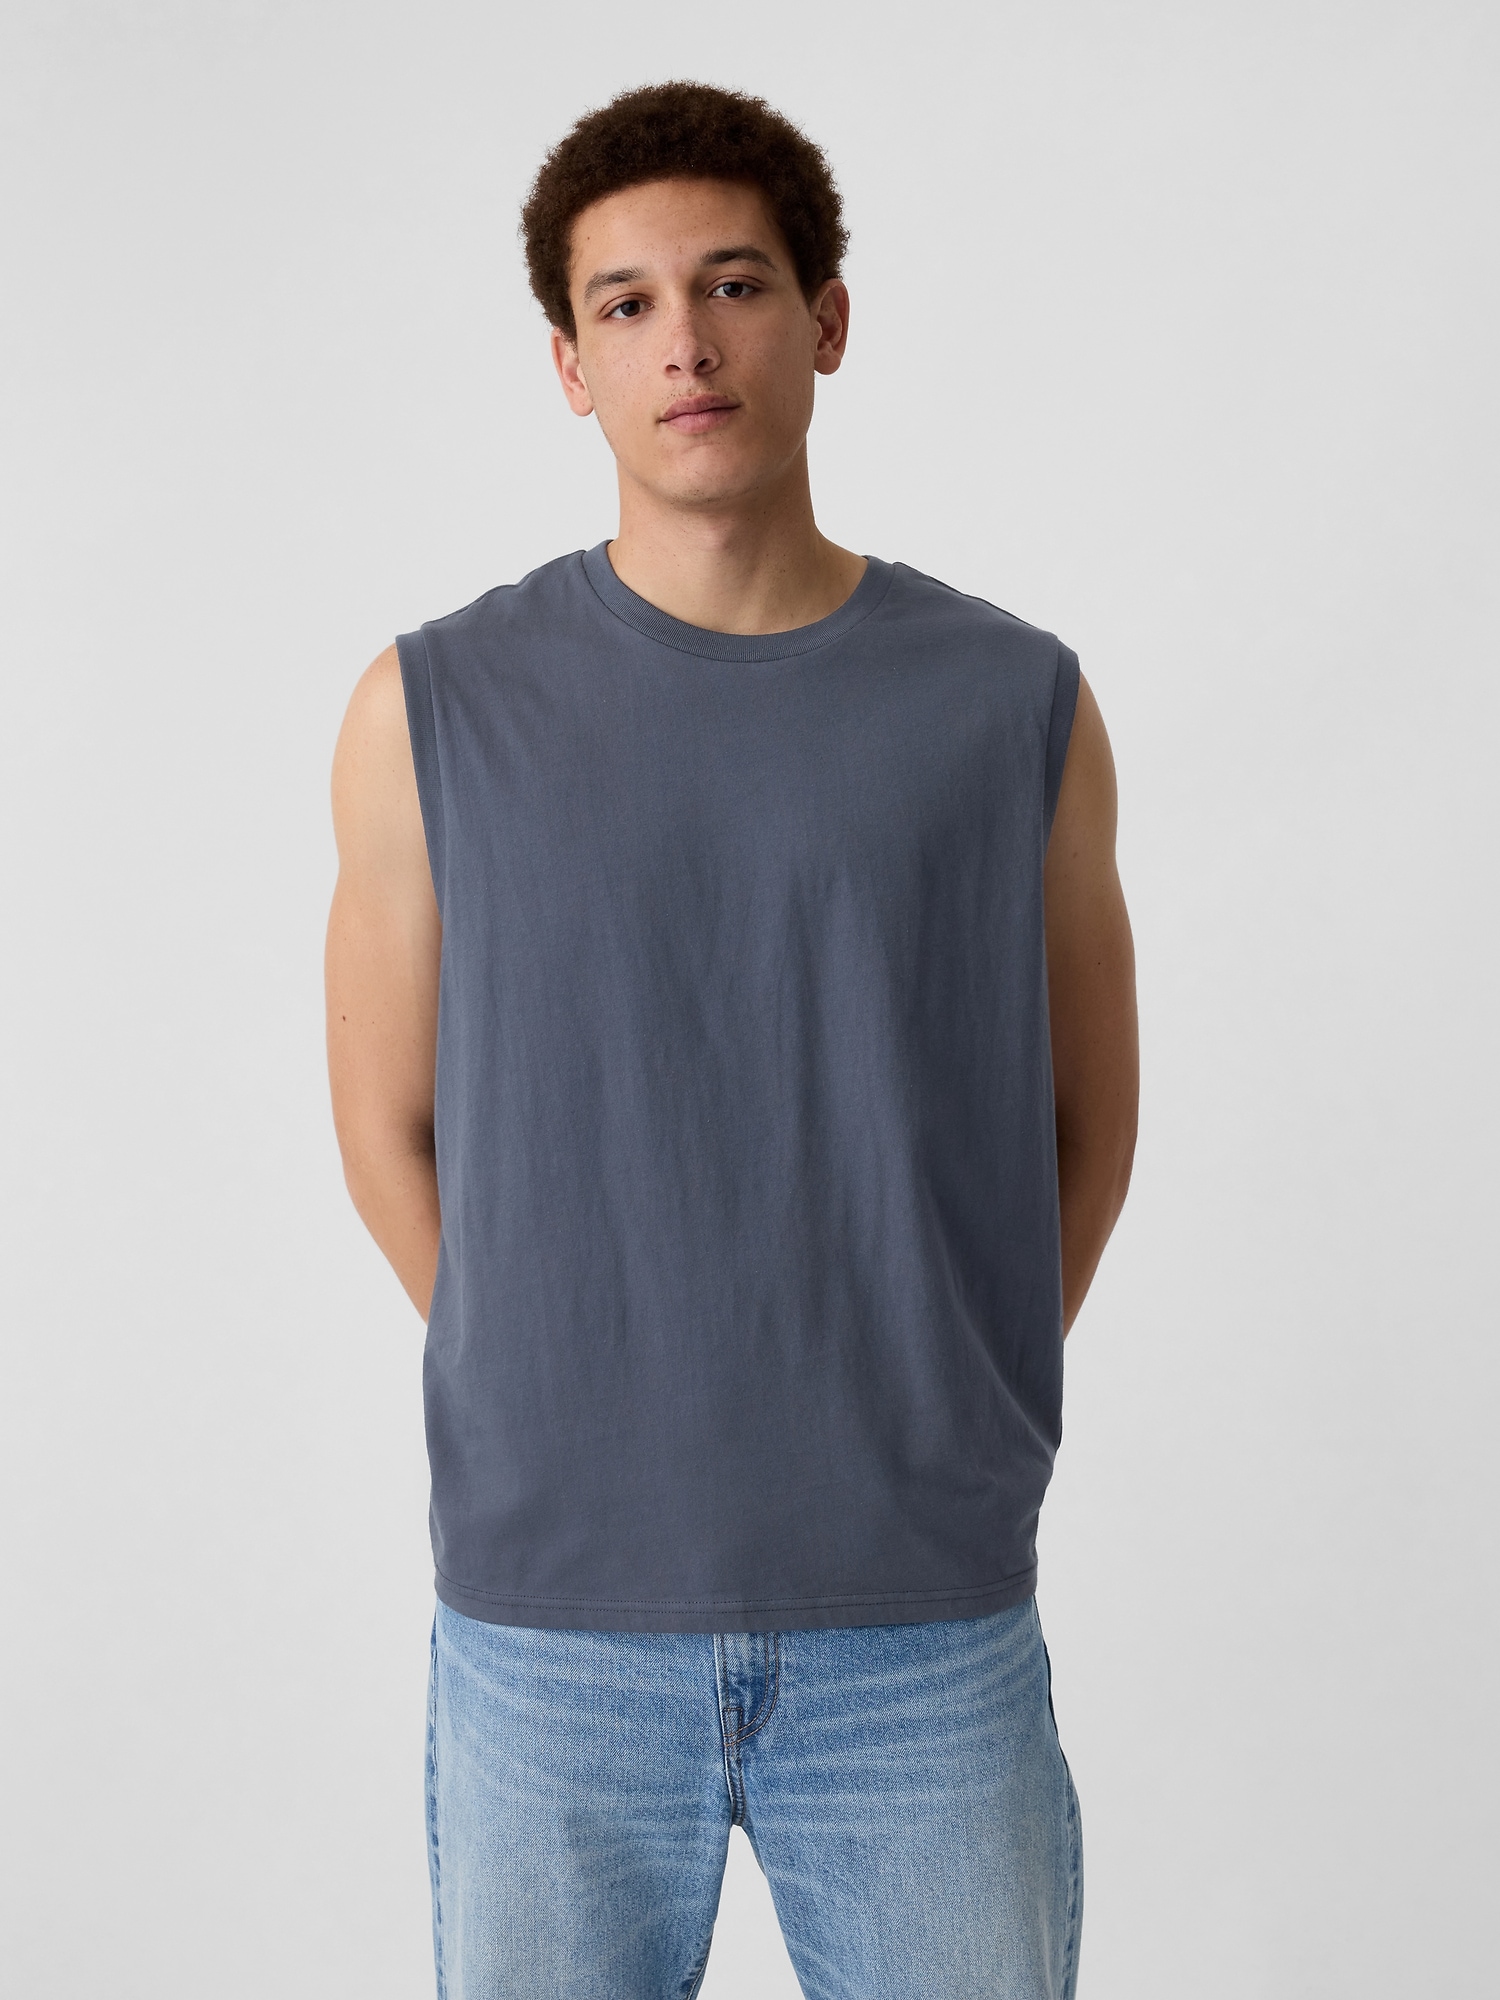 Relaxed Muscle Tank Top